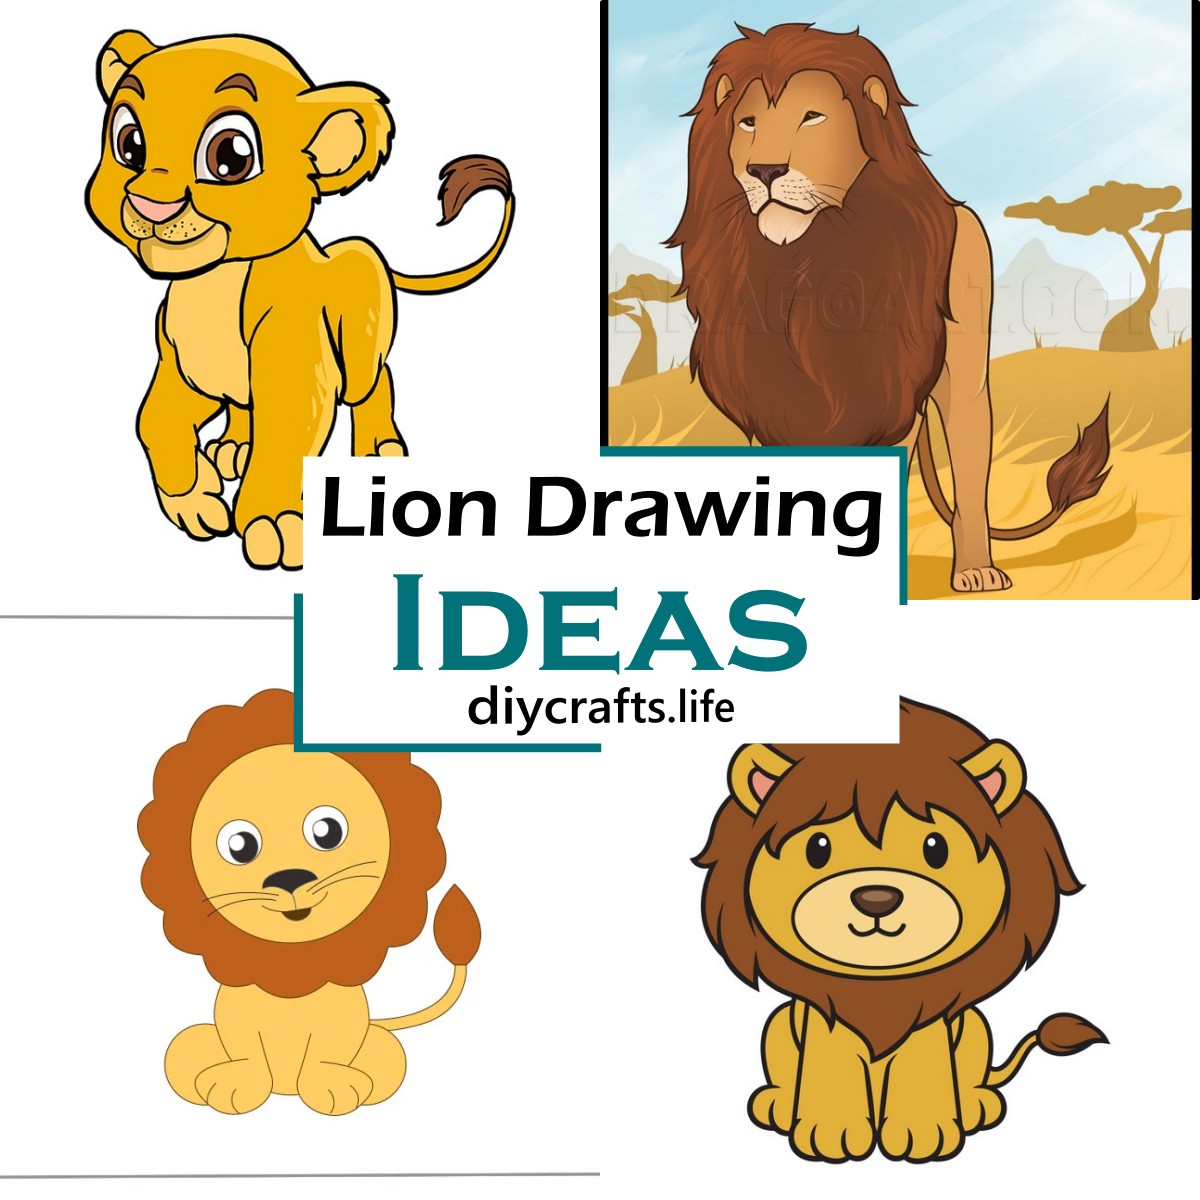 How to Draw a Lion Easy Step by Step |@TishaArtGallery - YouTube-saigonsouth.com.vn